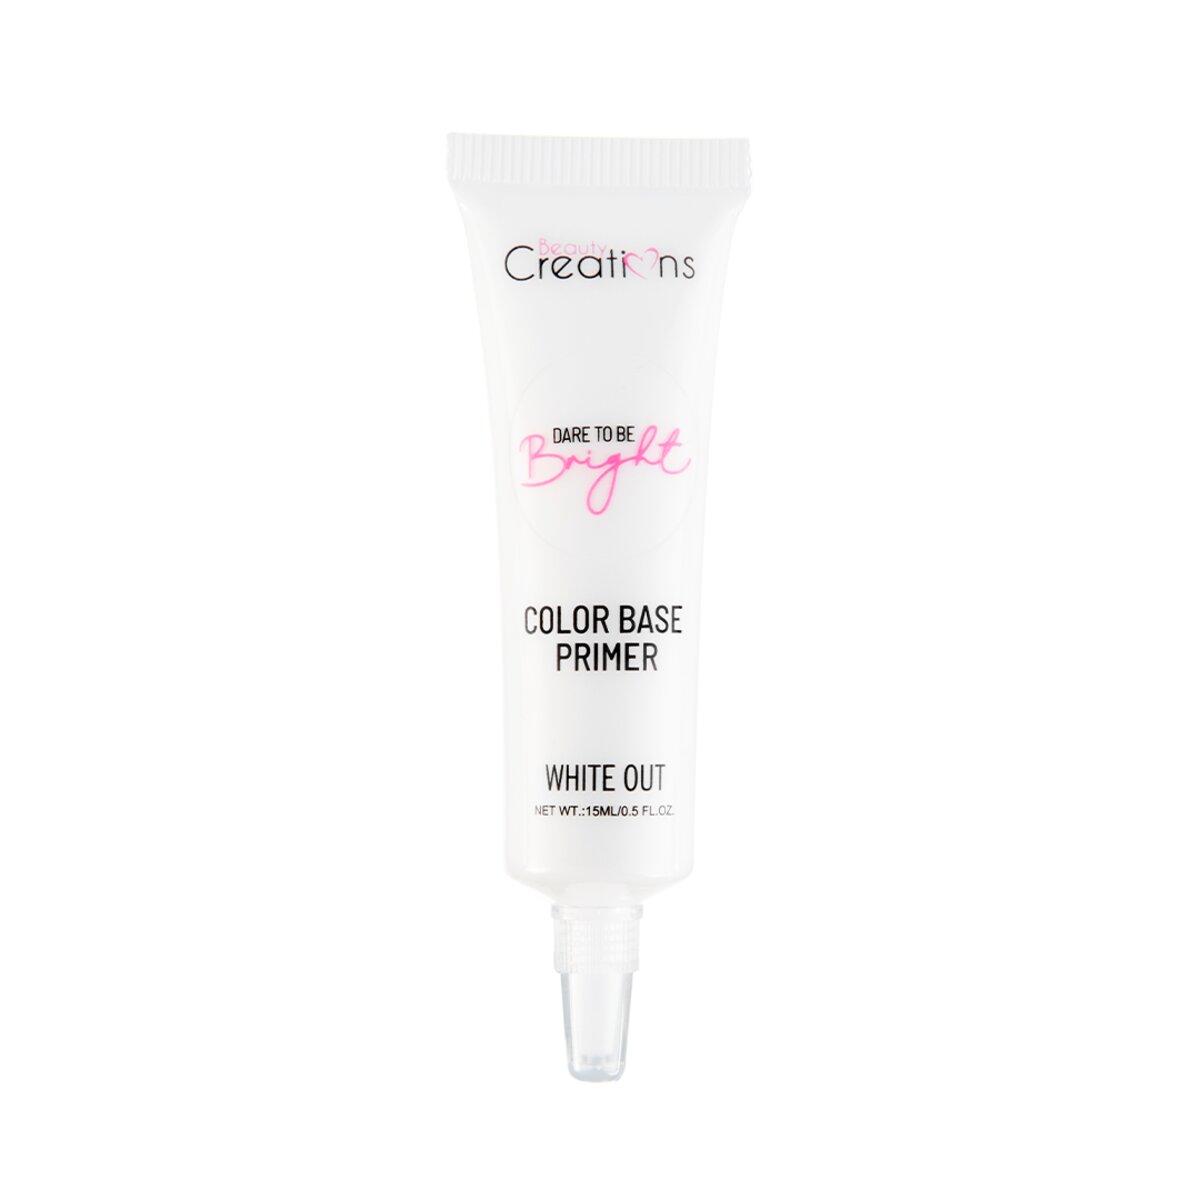 DARE TO BE BRIGHT EYE BASE COLOR PRIMER WHITE OUT - BEAUTY CREATIONS